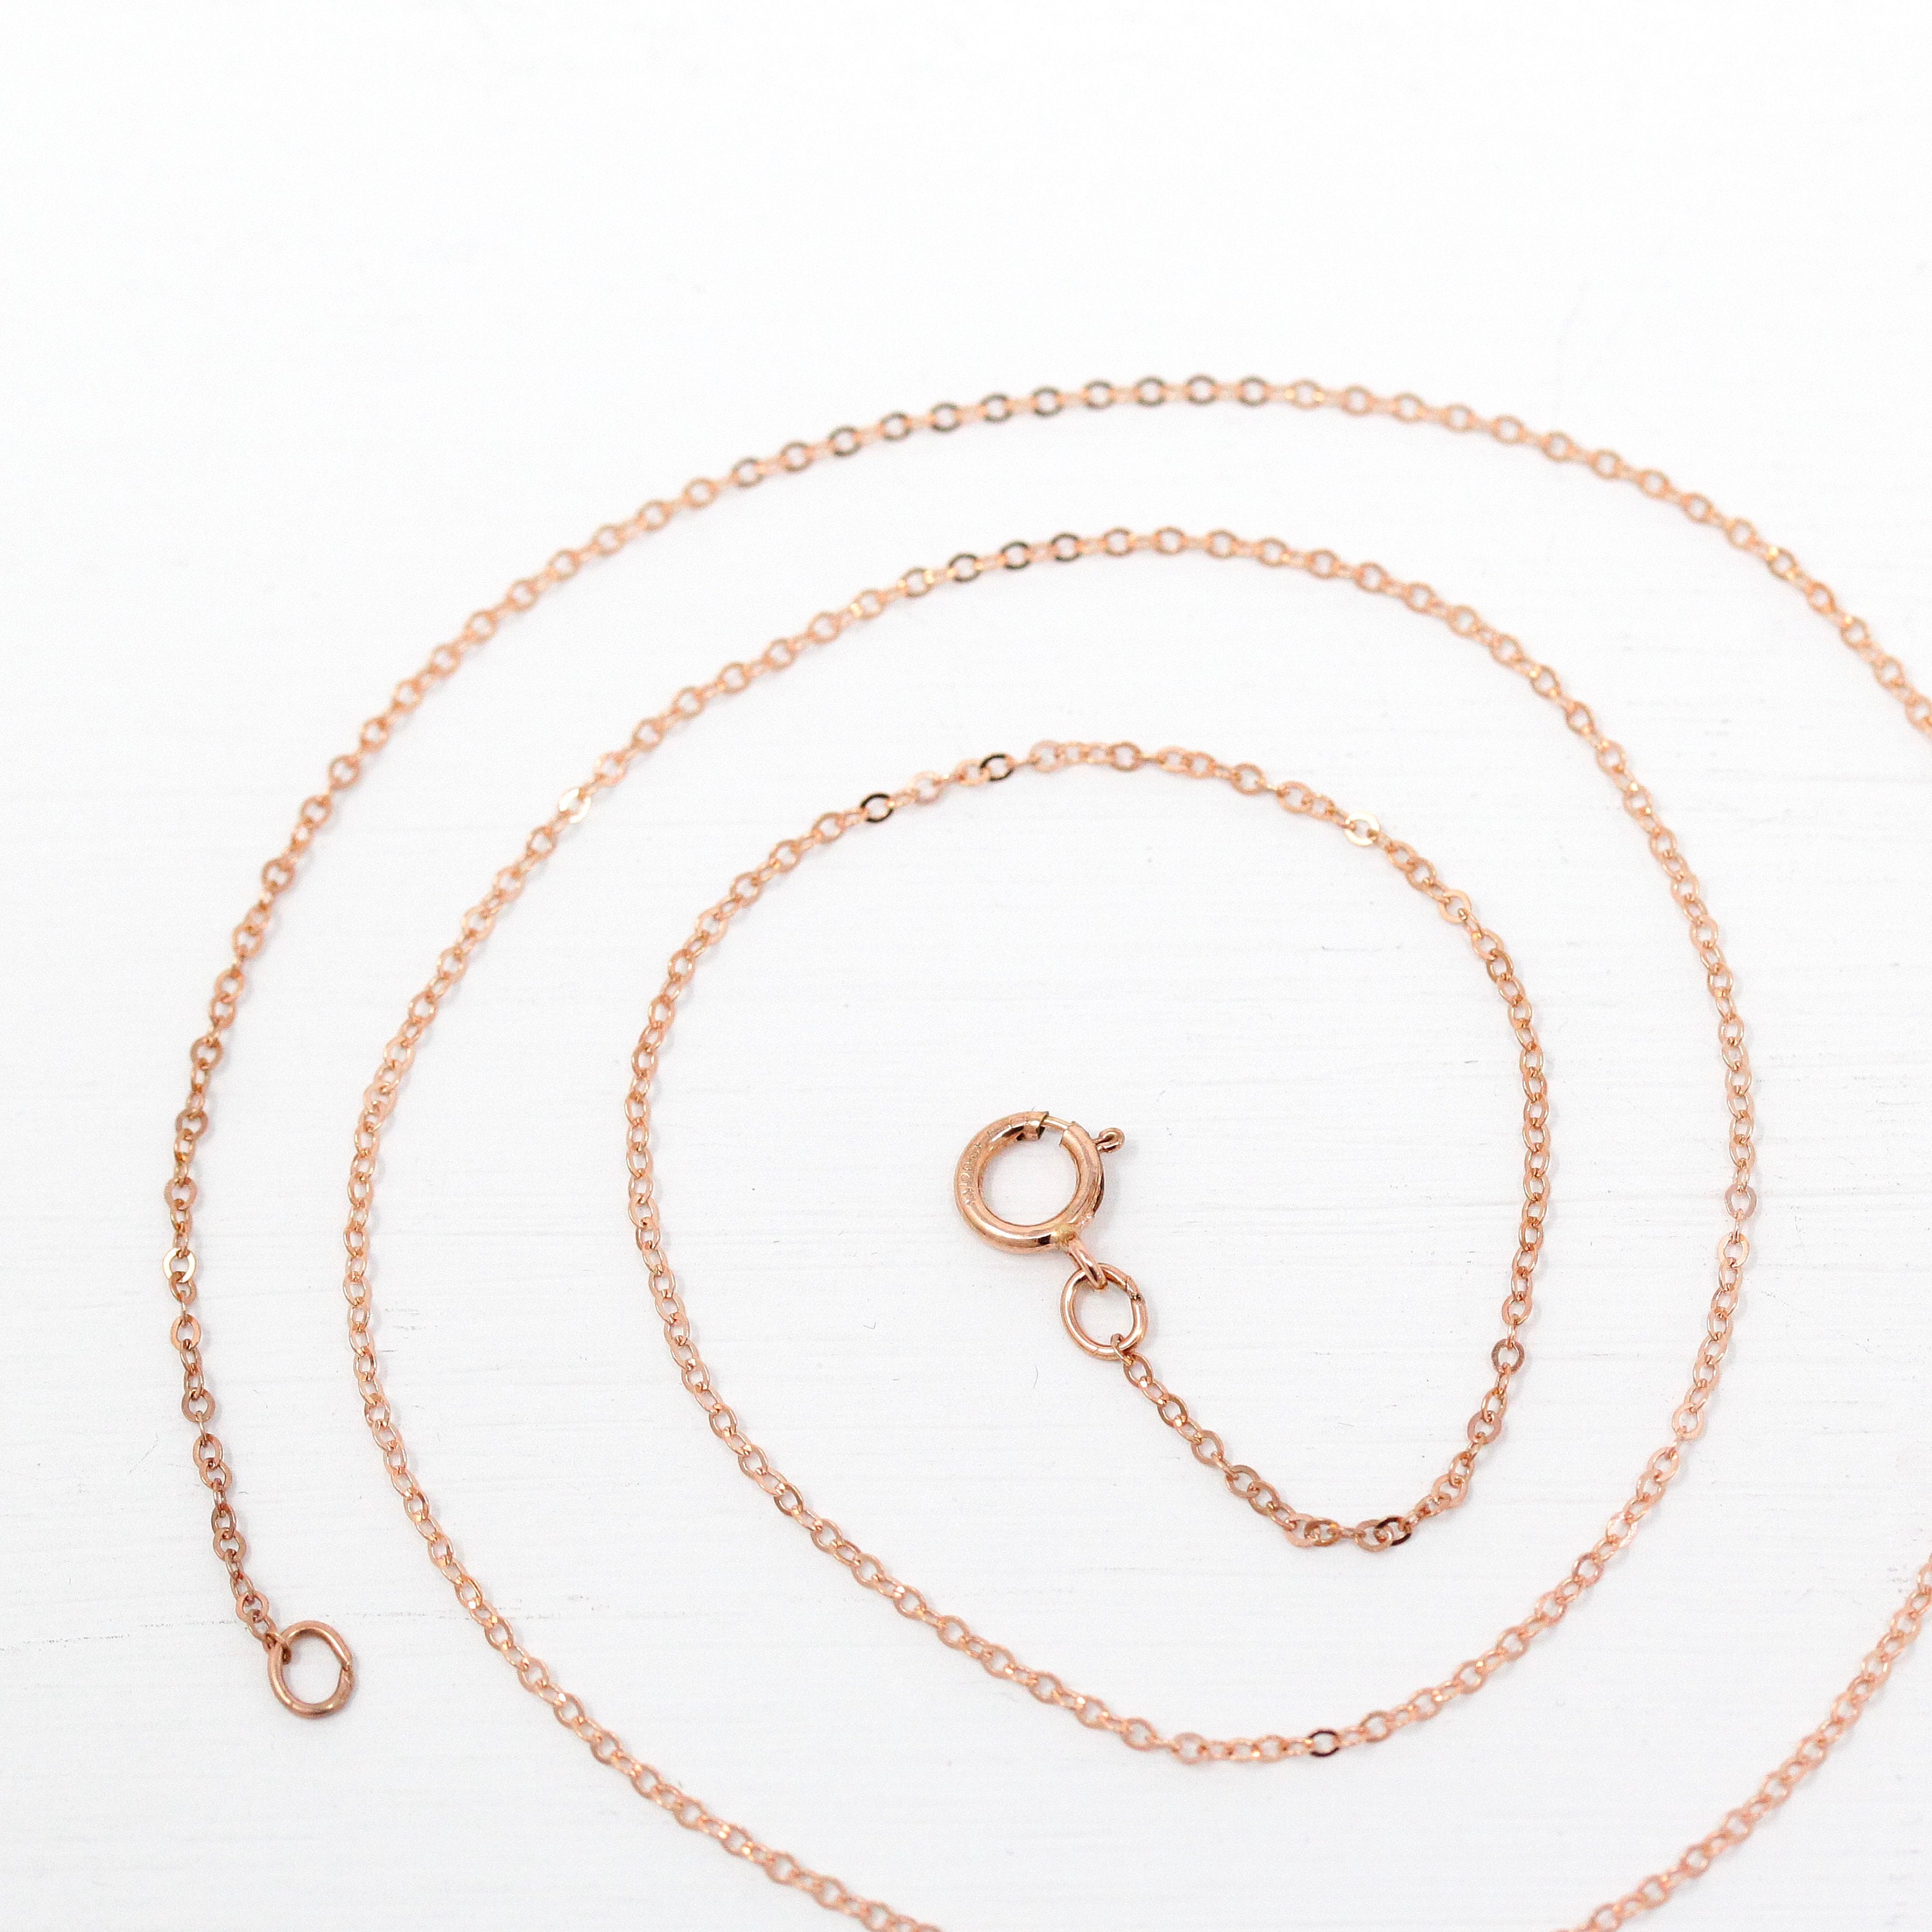 14K SOLID ROSE GOLD Cable Chain Necklace 18 inch Length with Spring ring Clasp 